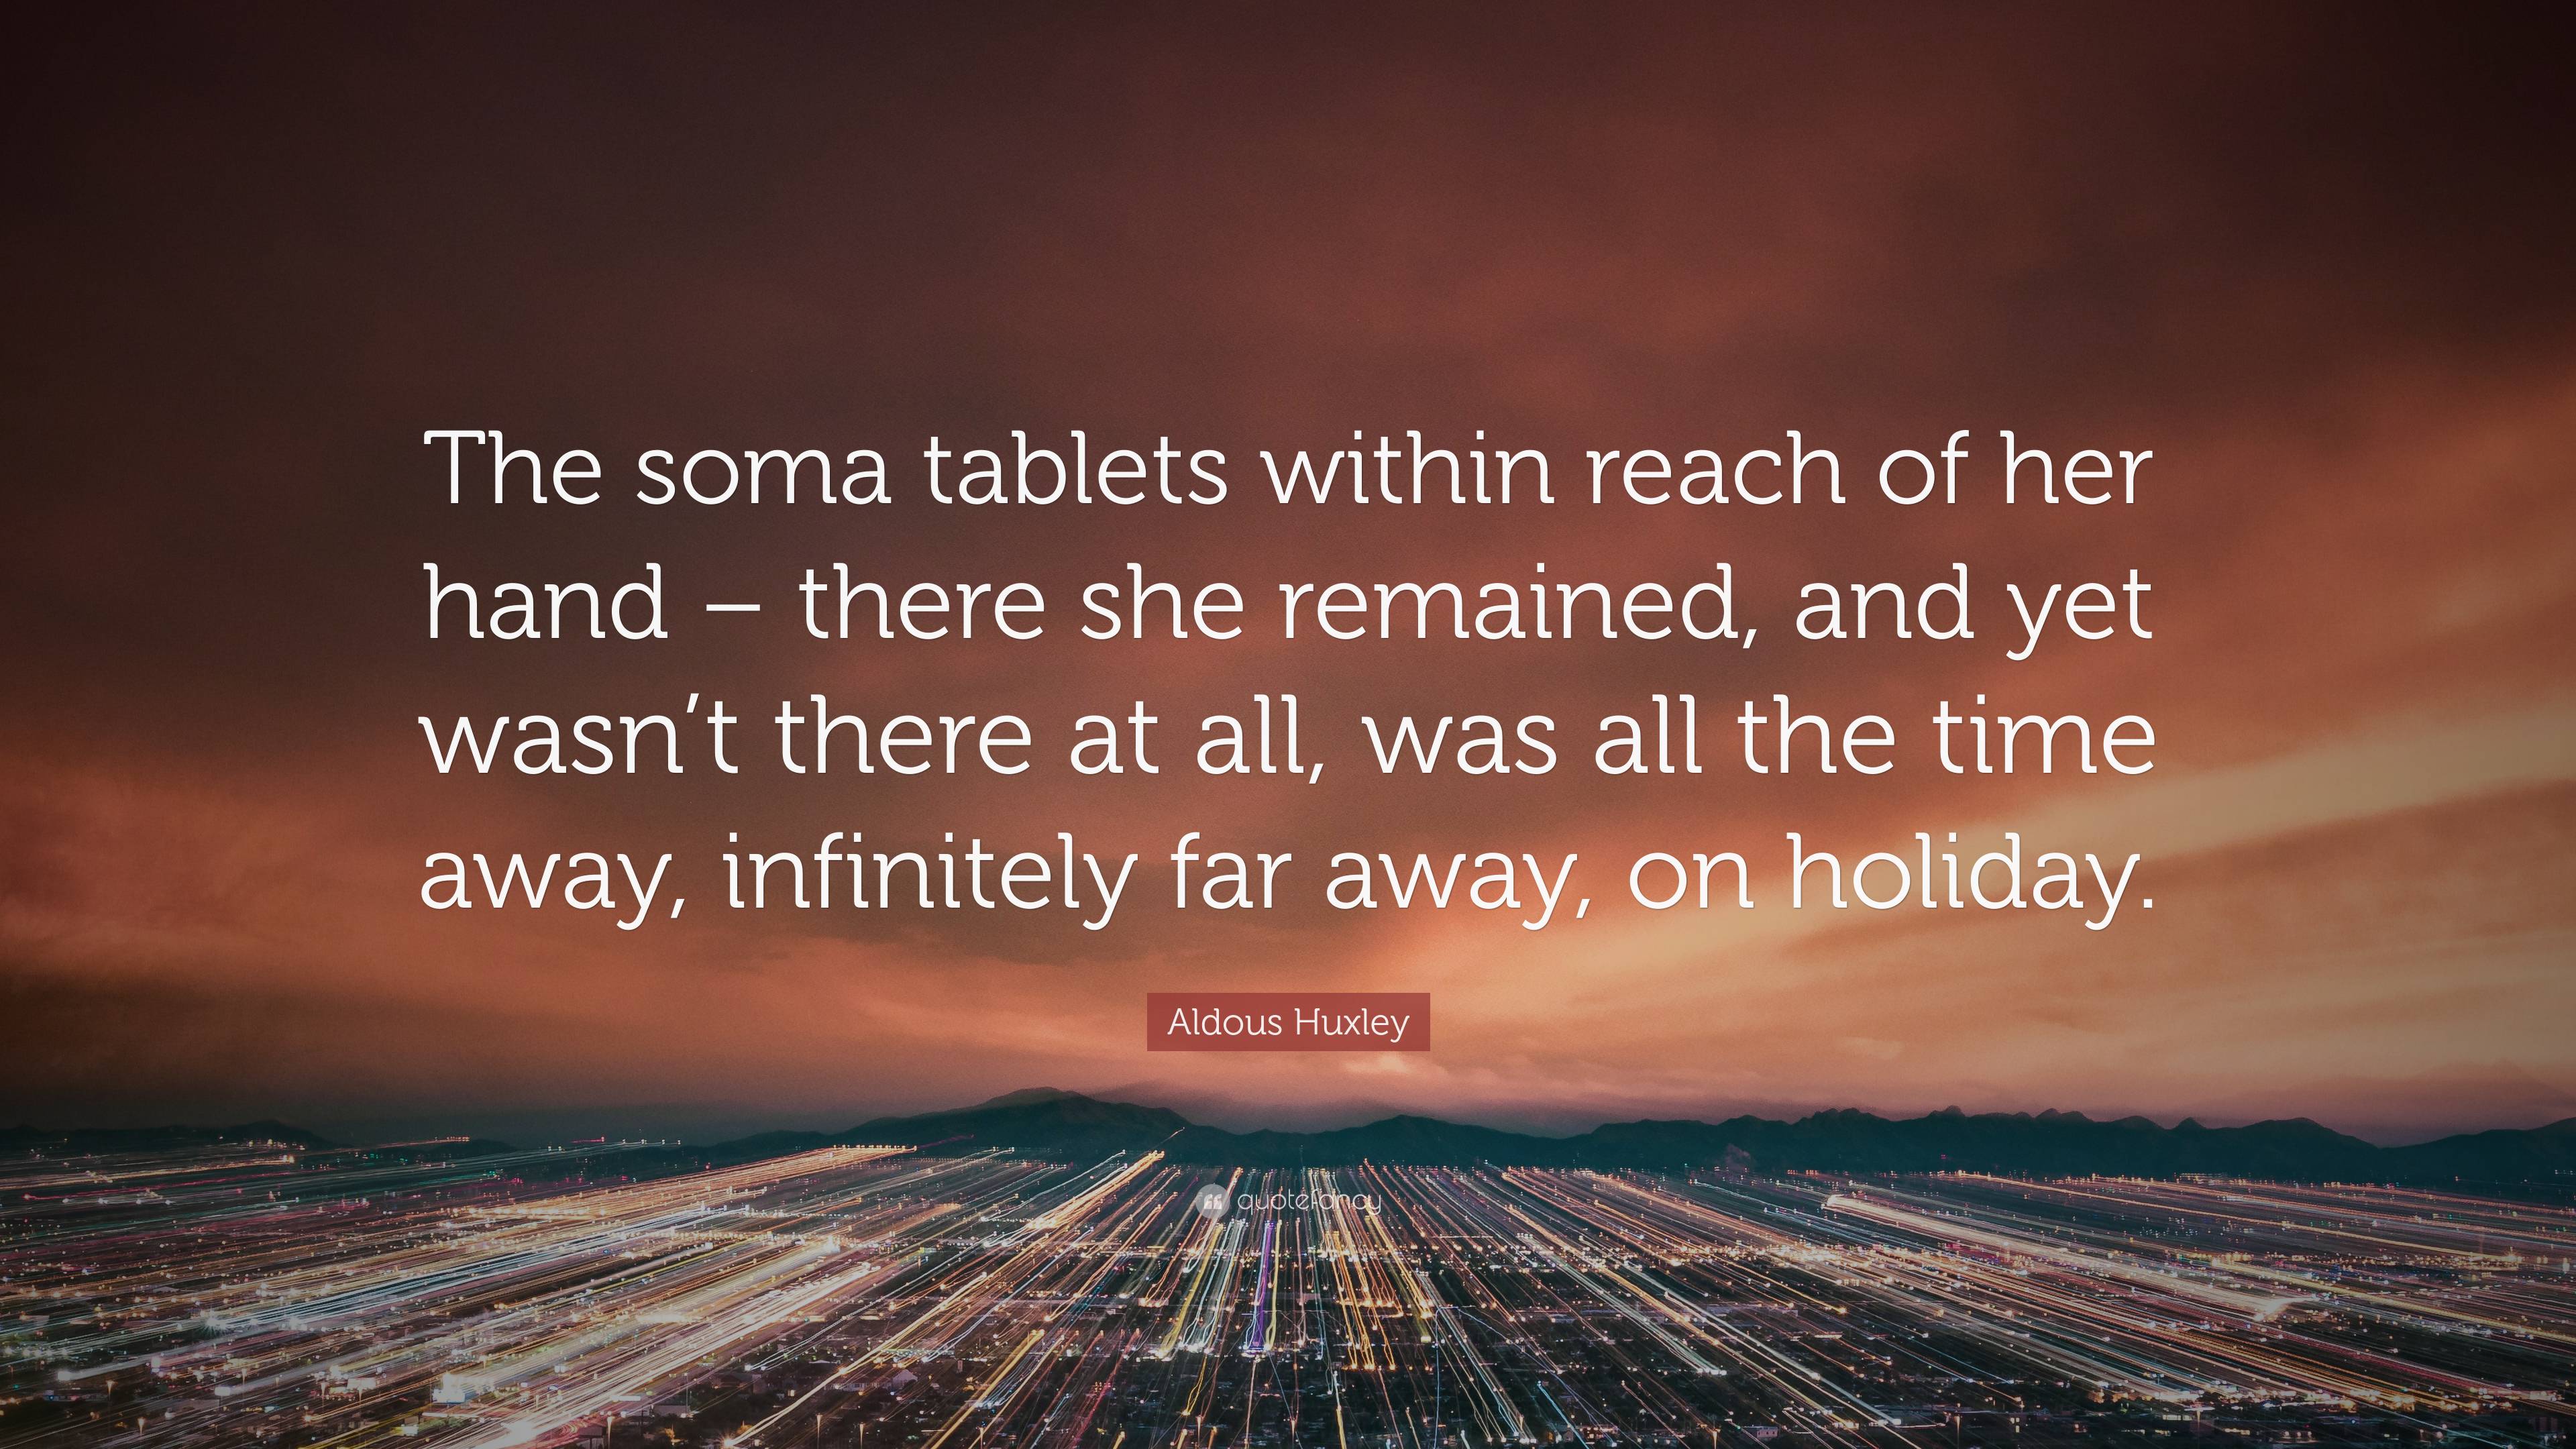 Aldous Huxley Quote: “The soma tablets within reach of her hand